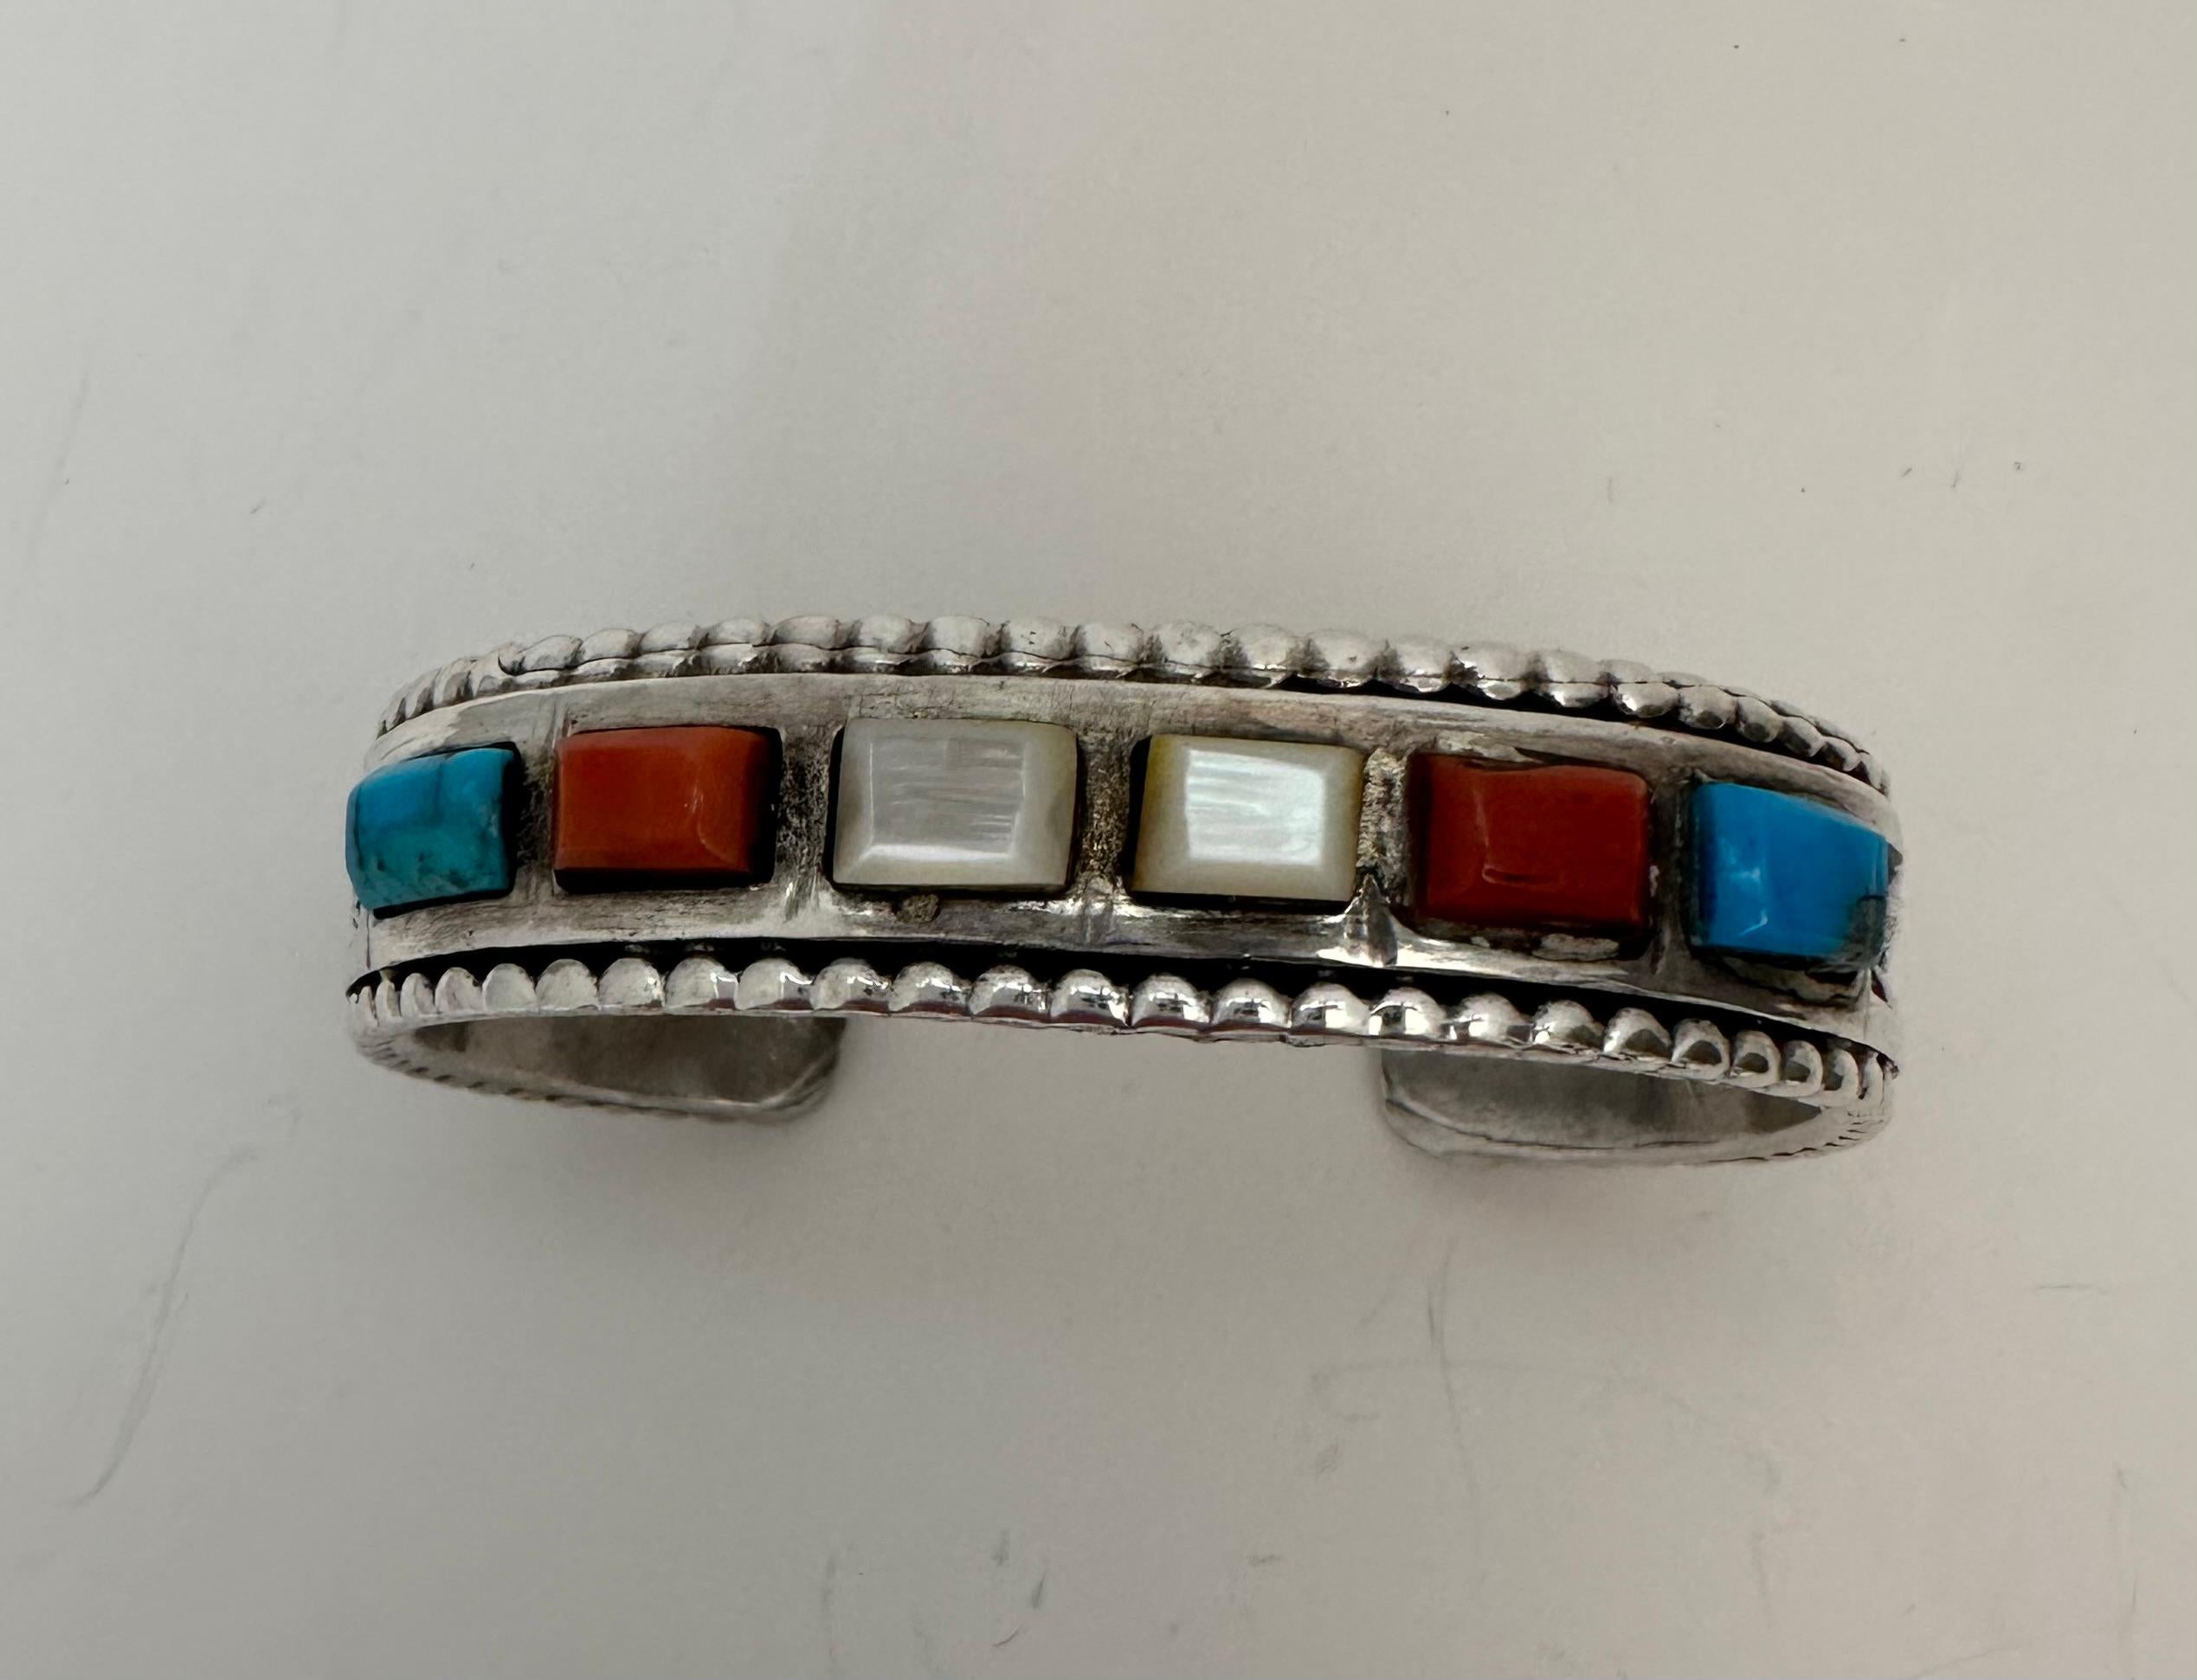 Vintage Navajo Sterling Silver .925 Coral, Turquoise And Mother Of Pearl Inlay Small Cuff Bracelet
Approx: 1/2